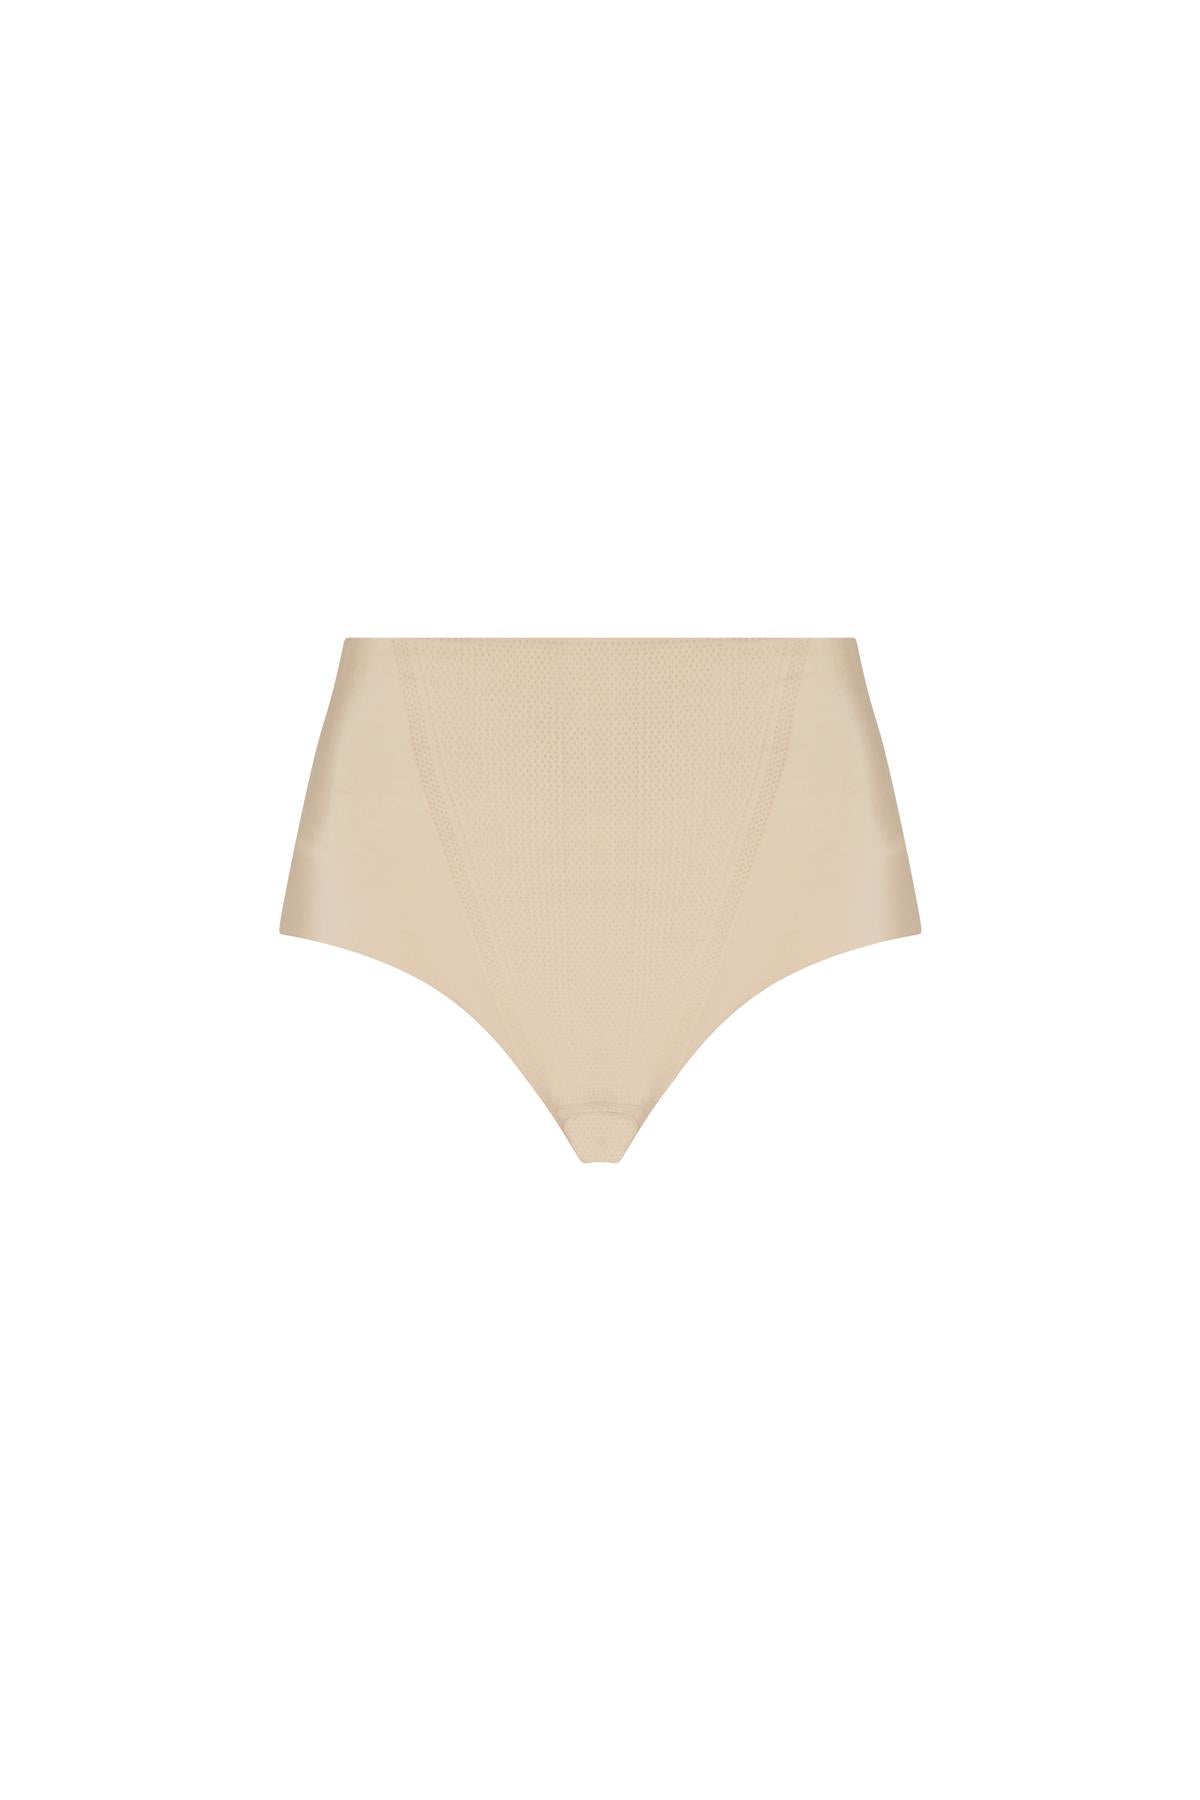 Commando Zone Control Smoothing Thong, Beige by Commando